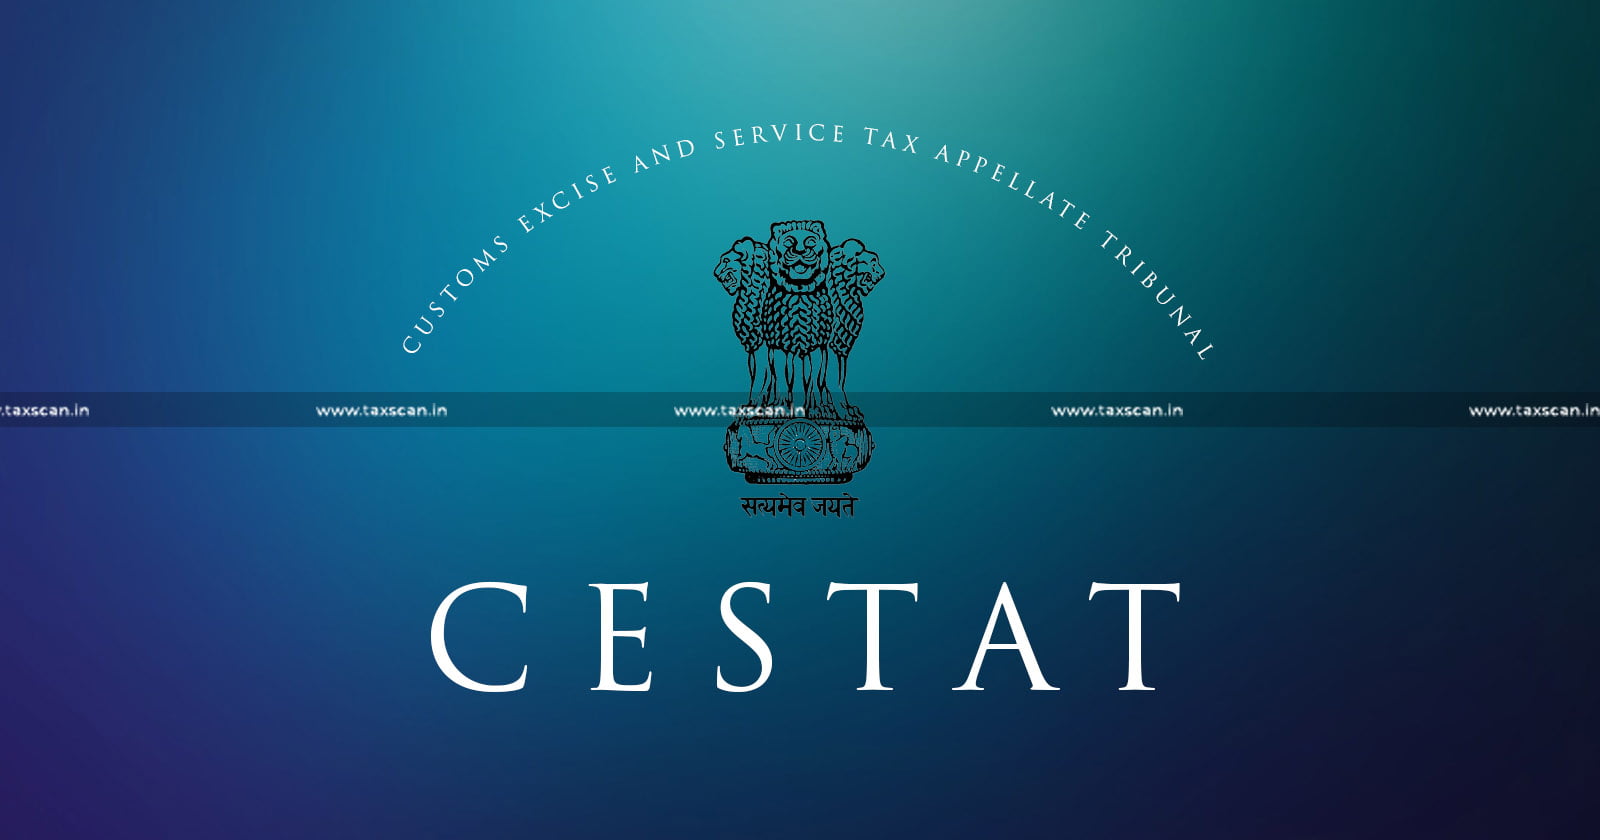 CESTAT Bangalore - Import duty - Differential Duty - Undervaluation of Goods - taxscan